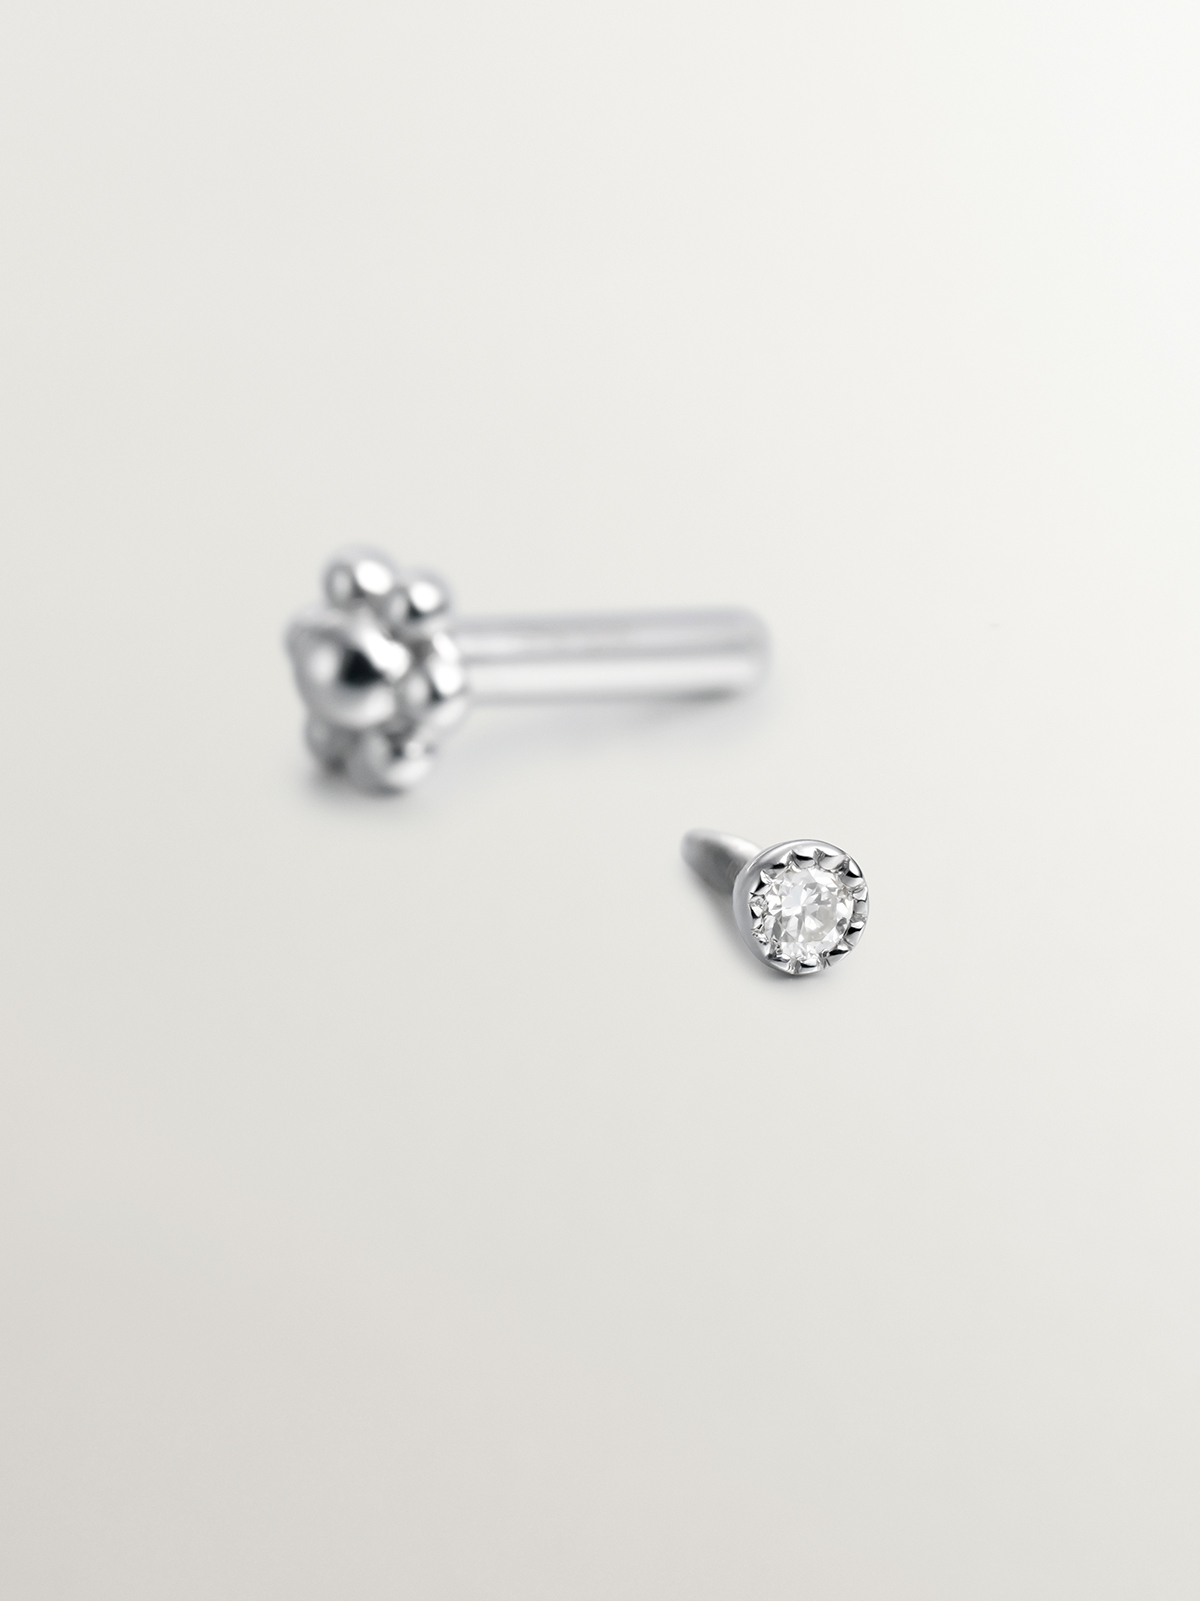 Individual 9K white gold piercing with diamond